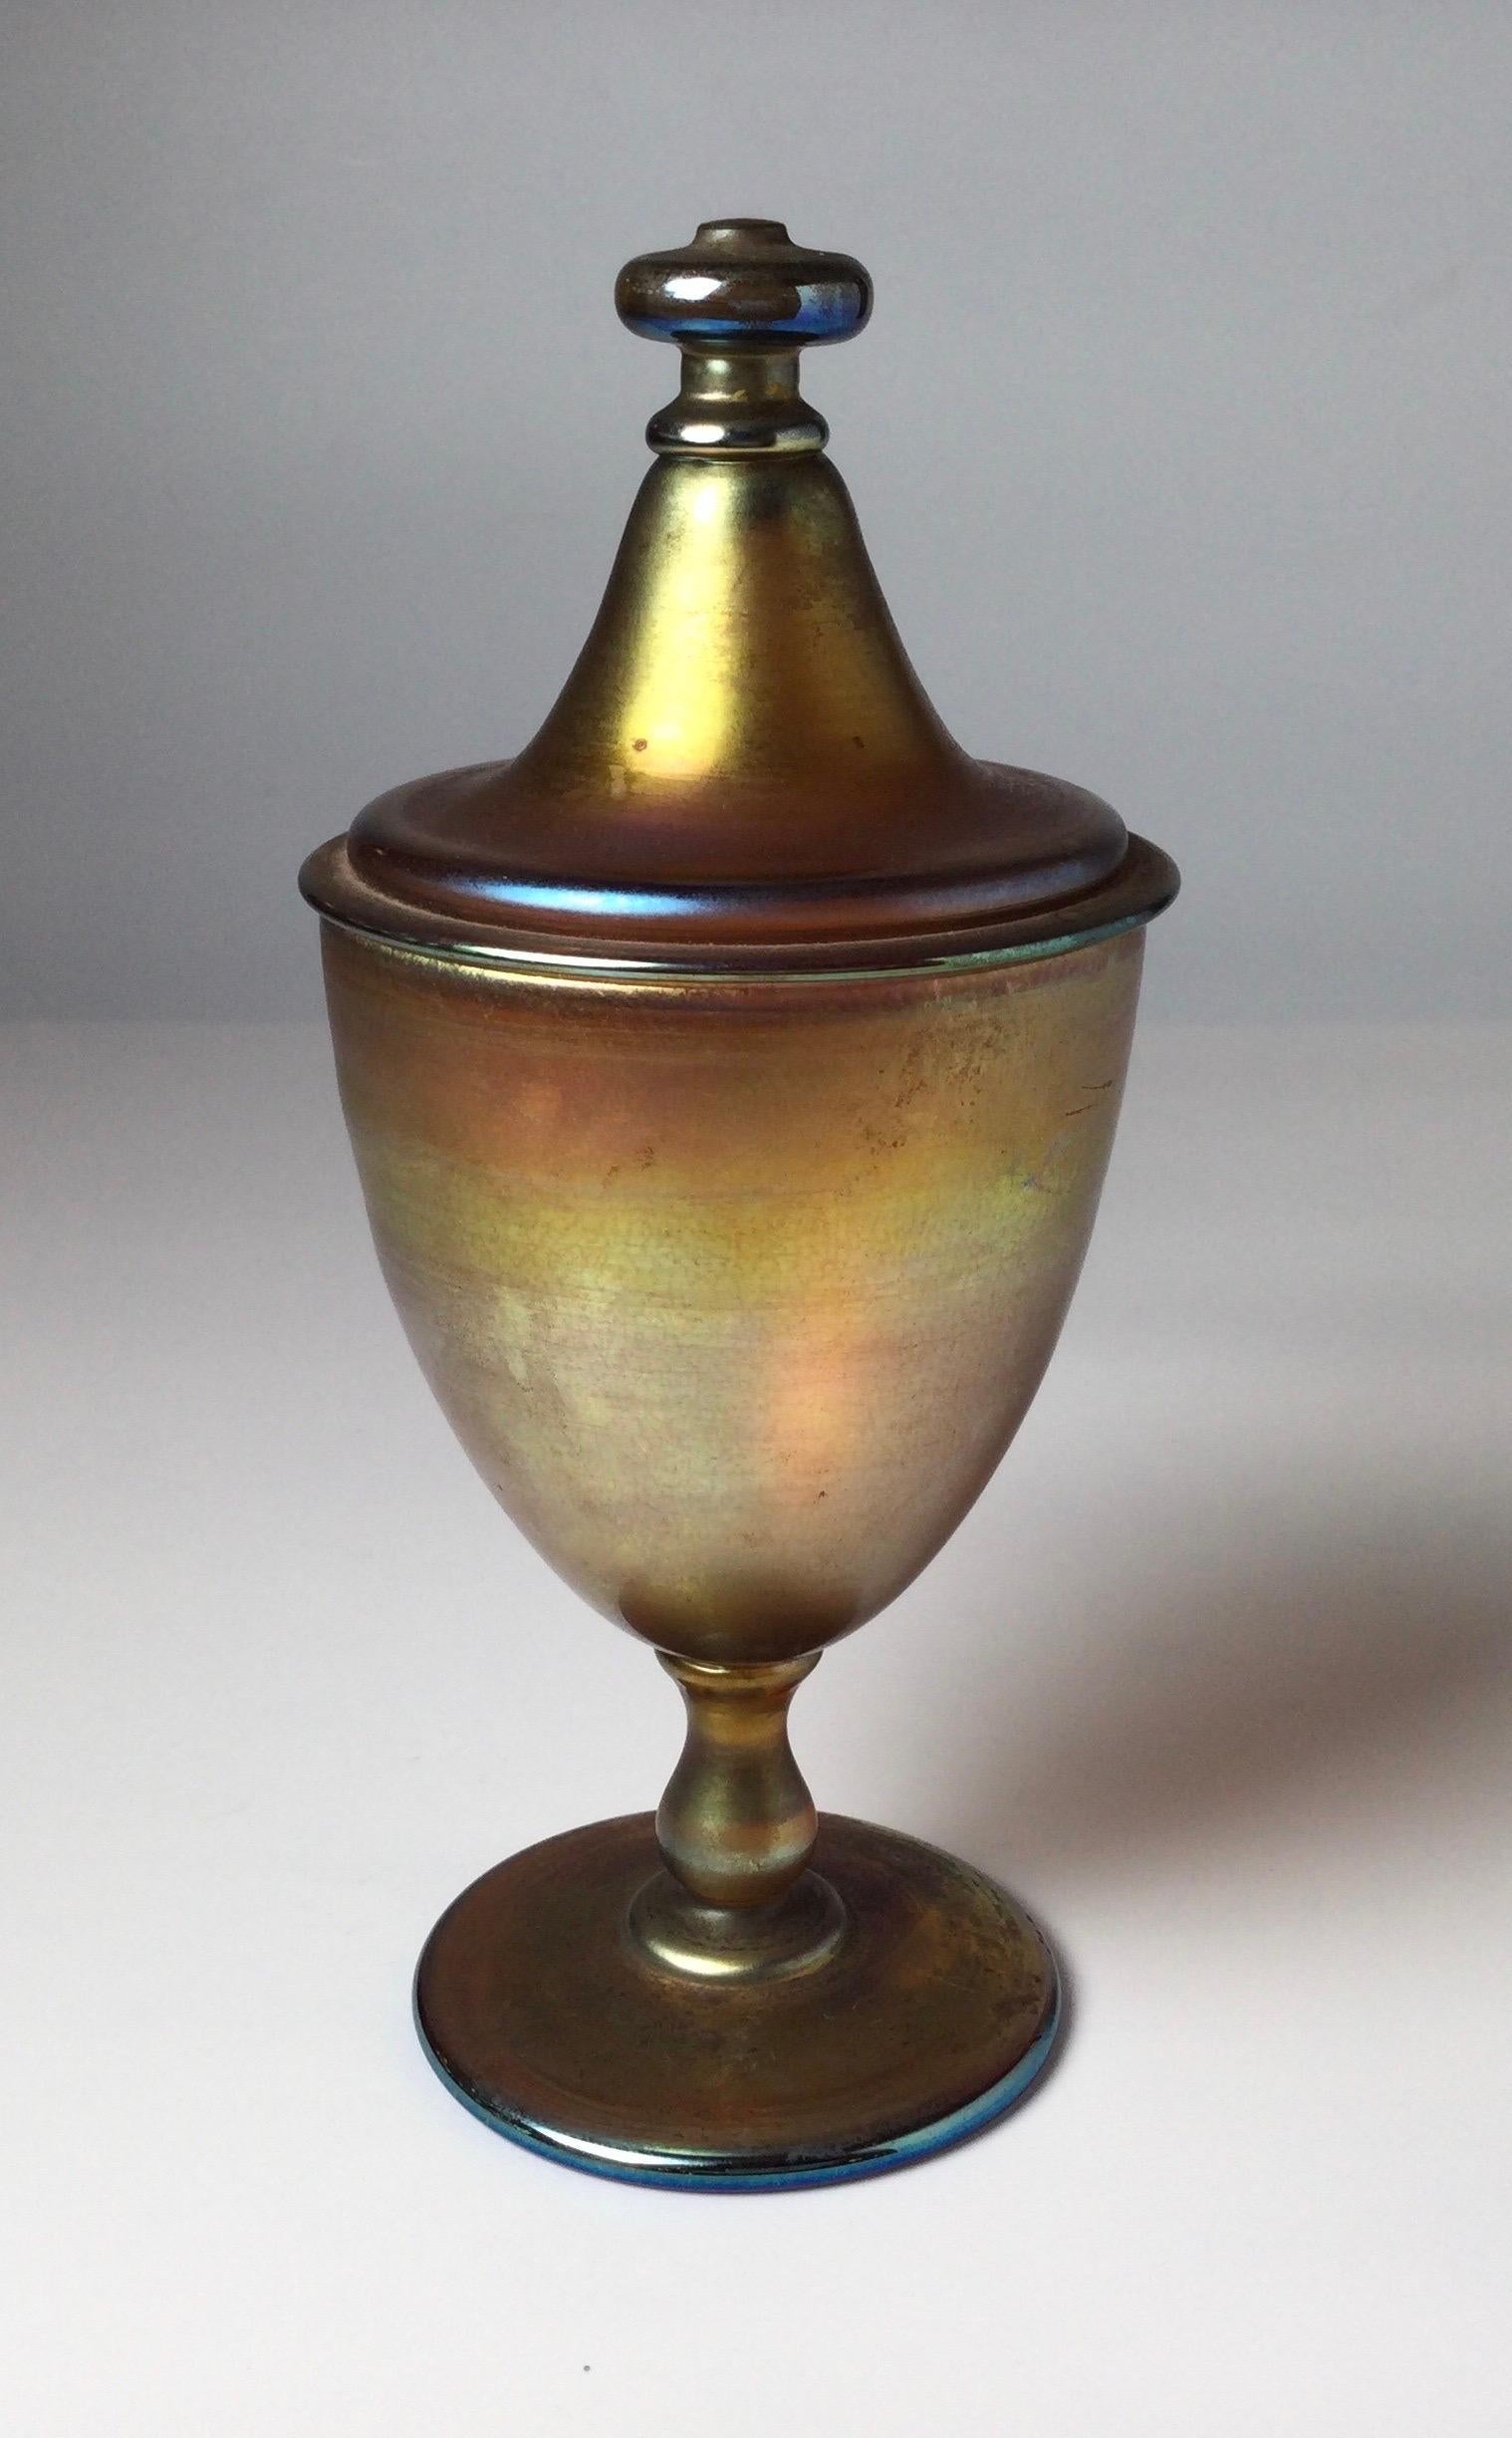 Signed Louis Comfort Tiffany favrille glass footed compote. The classic urn shape on pedestal base with raised cover with flattened knop. The glass in shades of deep gold, pumpkin, pink and blue iridescence. Clearly signed on bottom. Provenance- Mr.